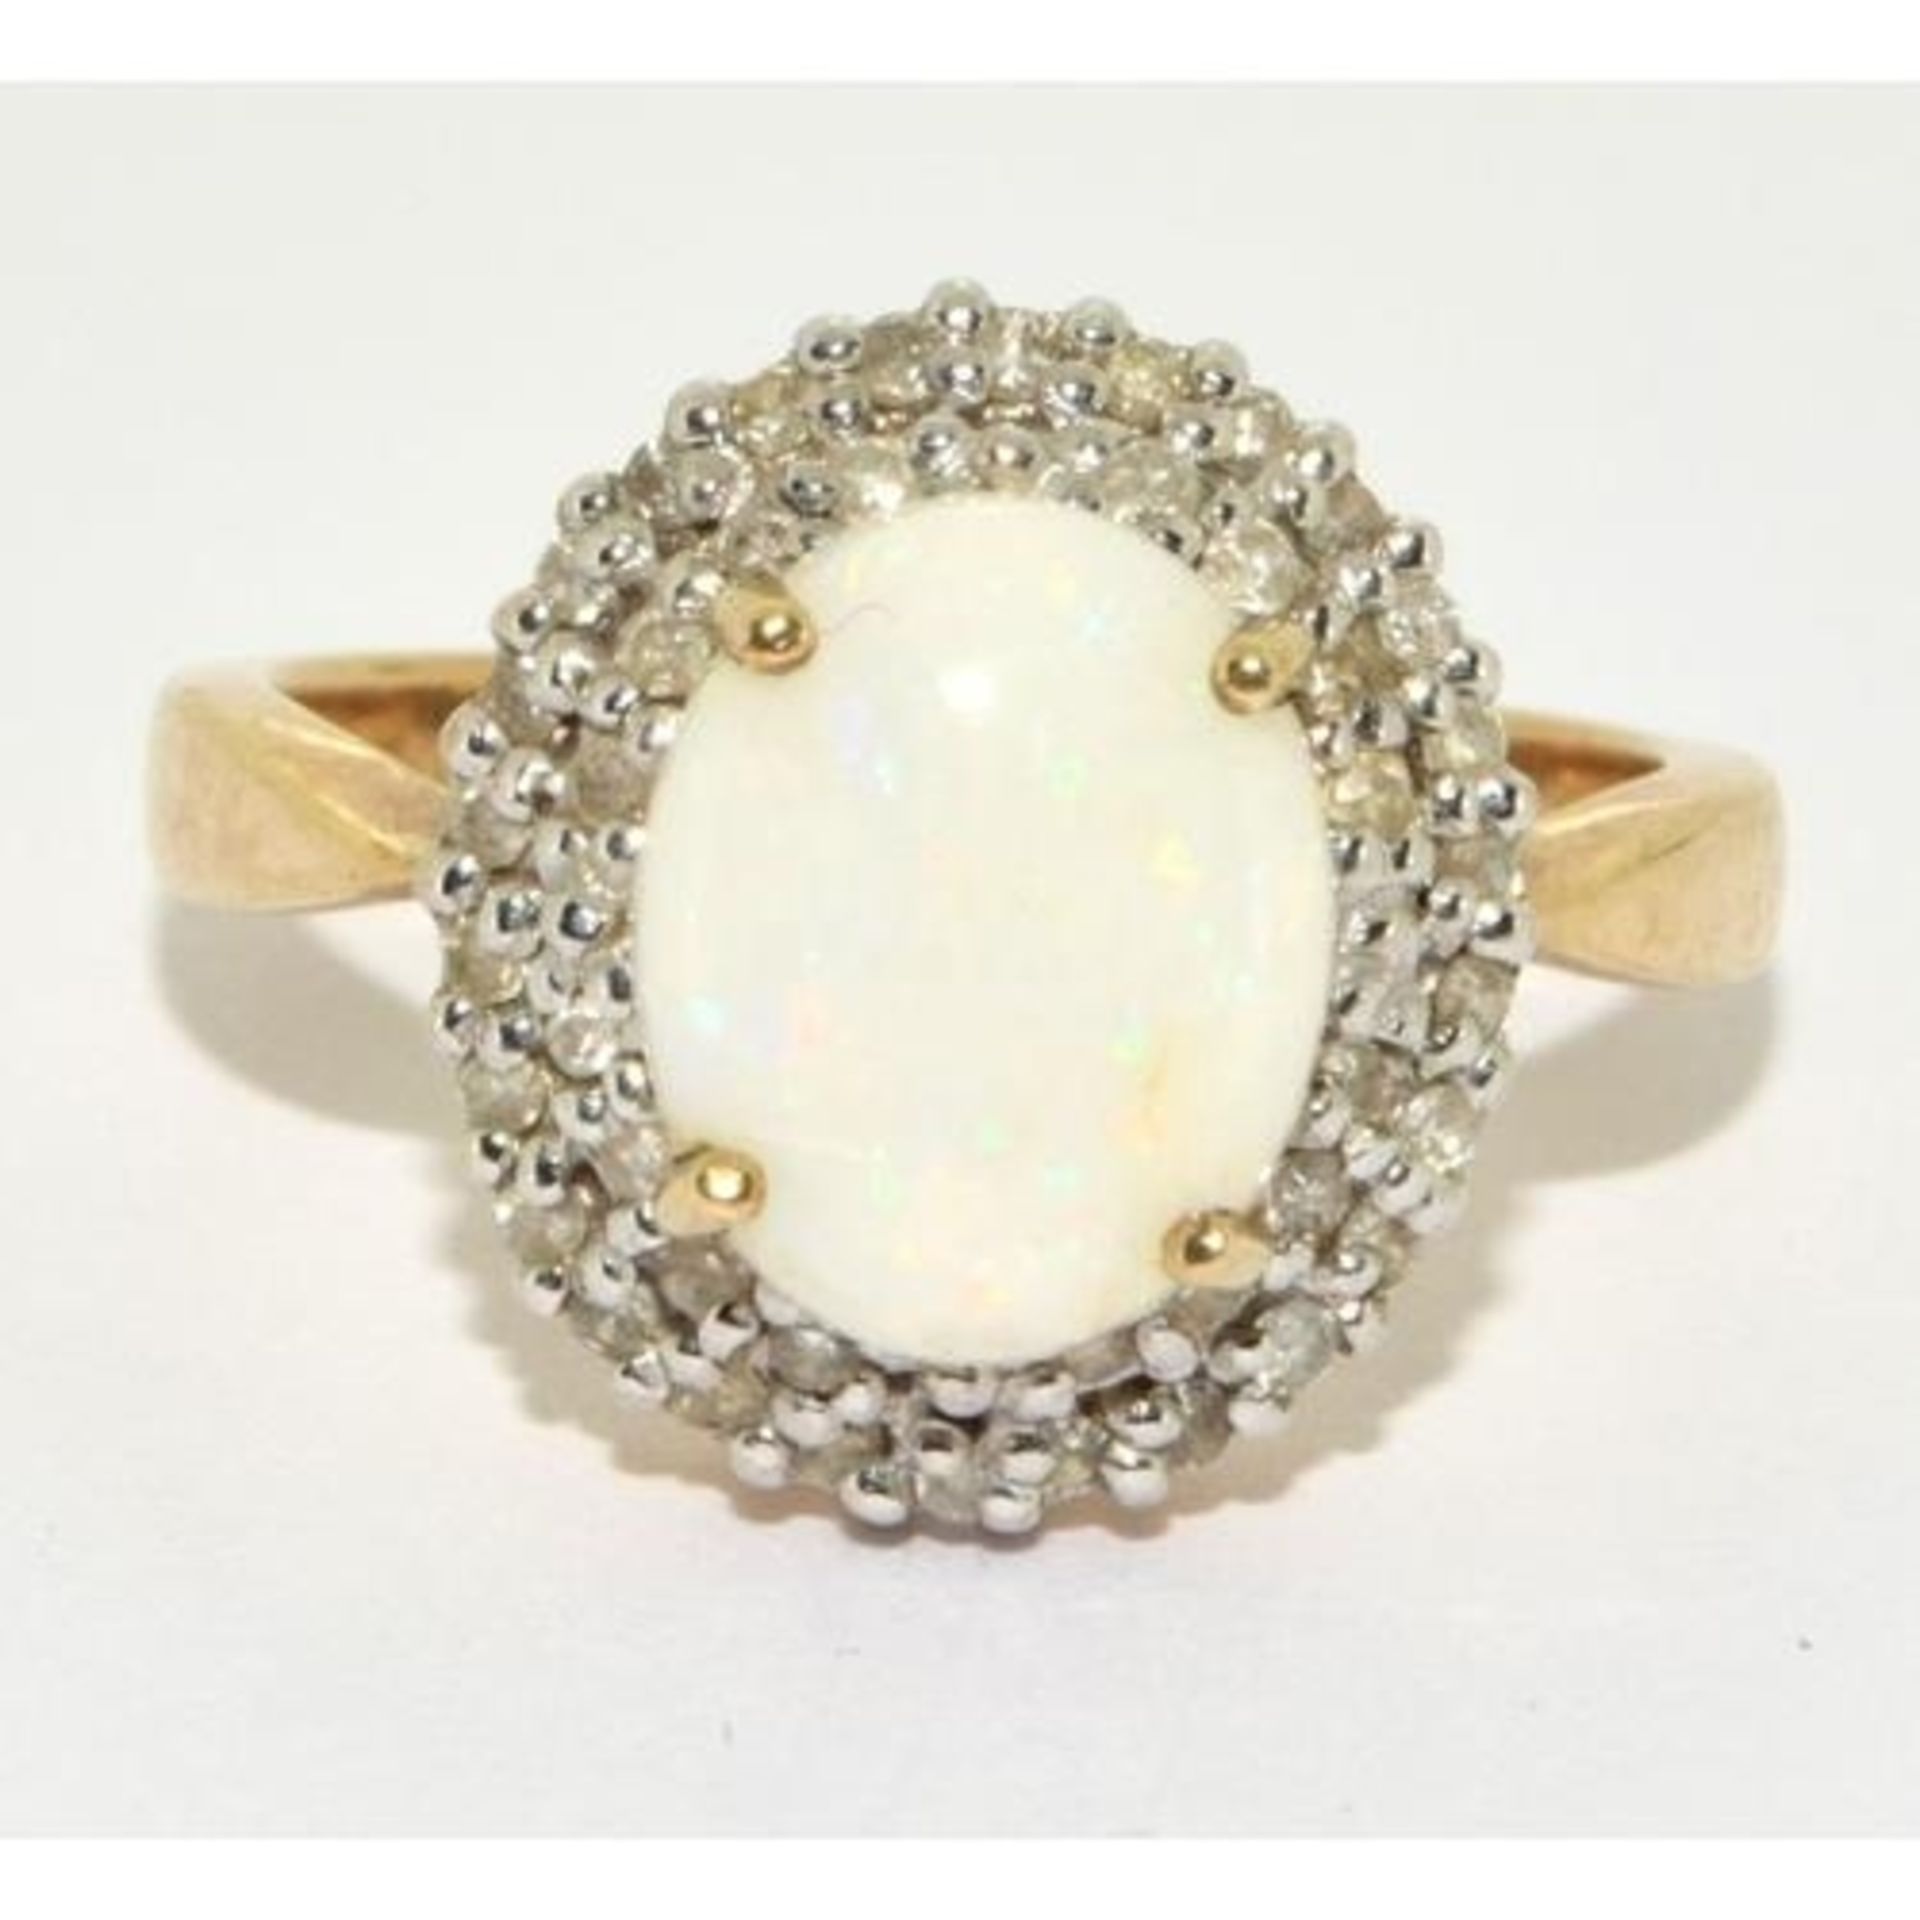 9ct gold ladies Diamond and Opal statement ring in a halo design setting approx size N